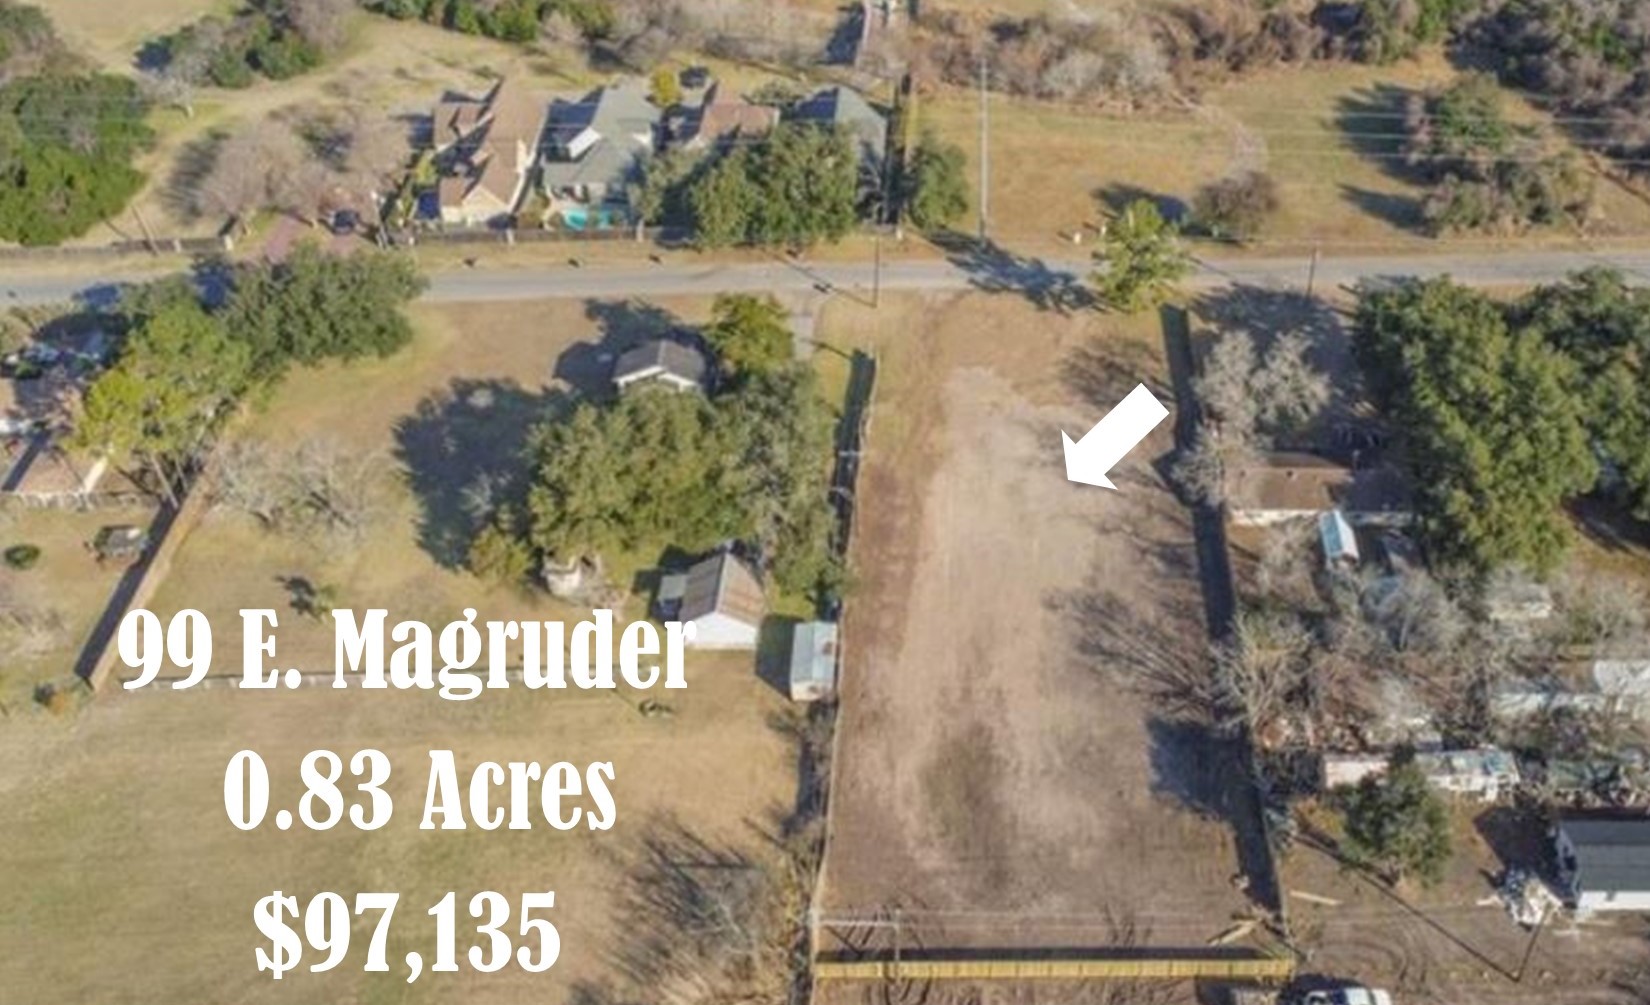 land for sale at 99 E. Magruder in Victoria, TX